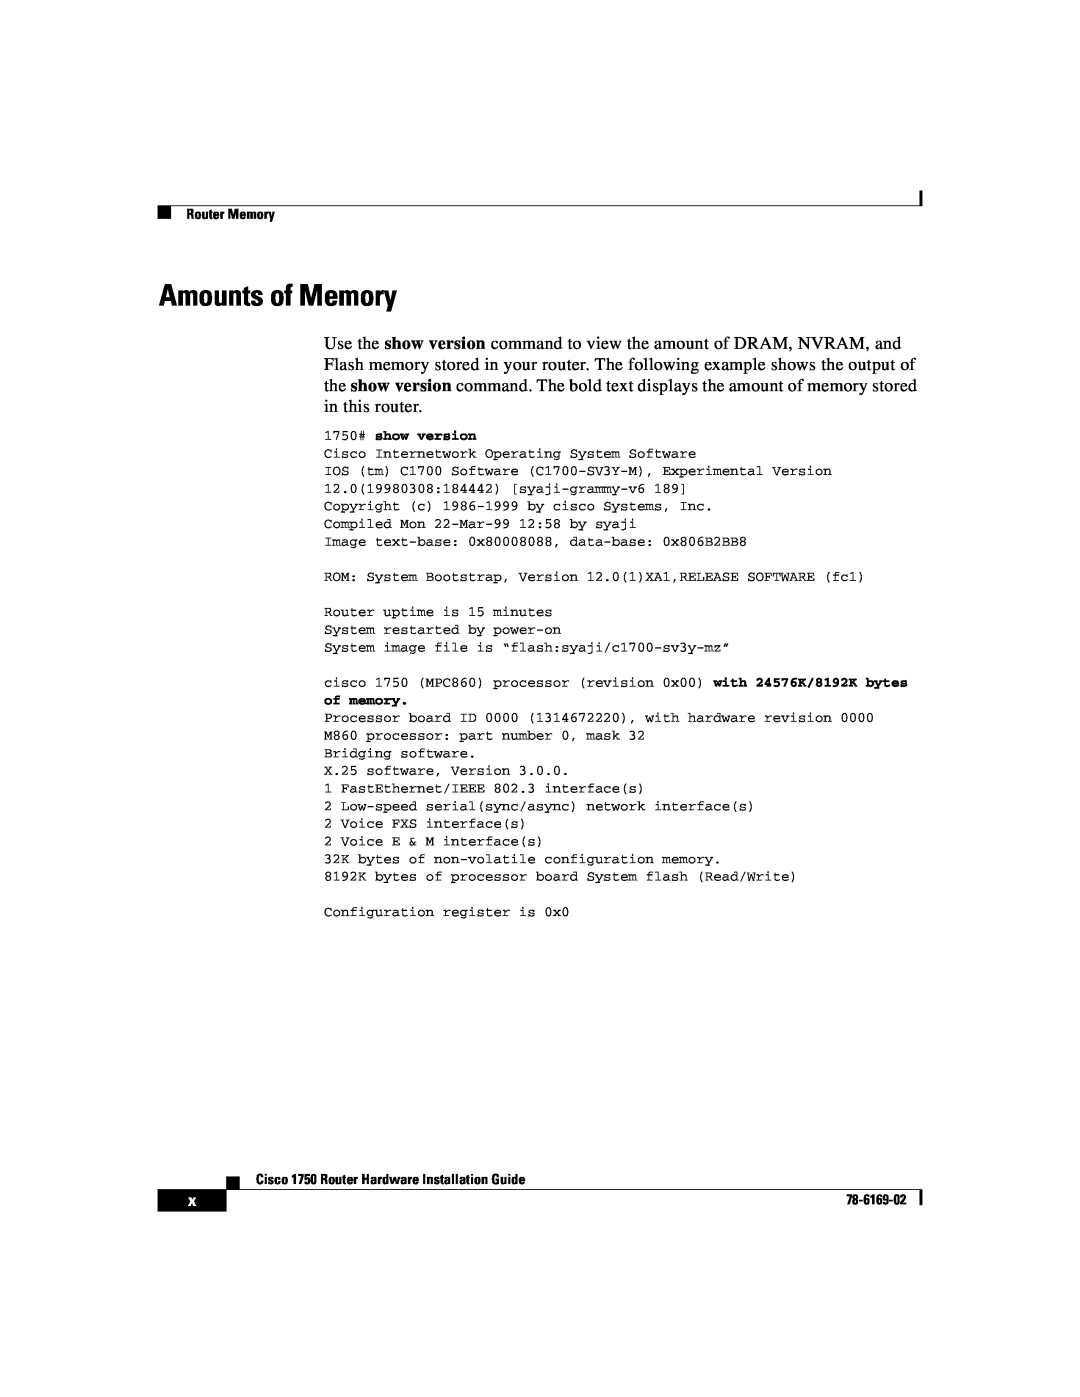 Cisco Systems CISCO1750 manual Amounts of Memory, 1750# show version, of memory 